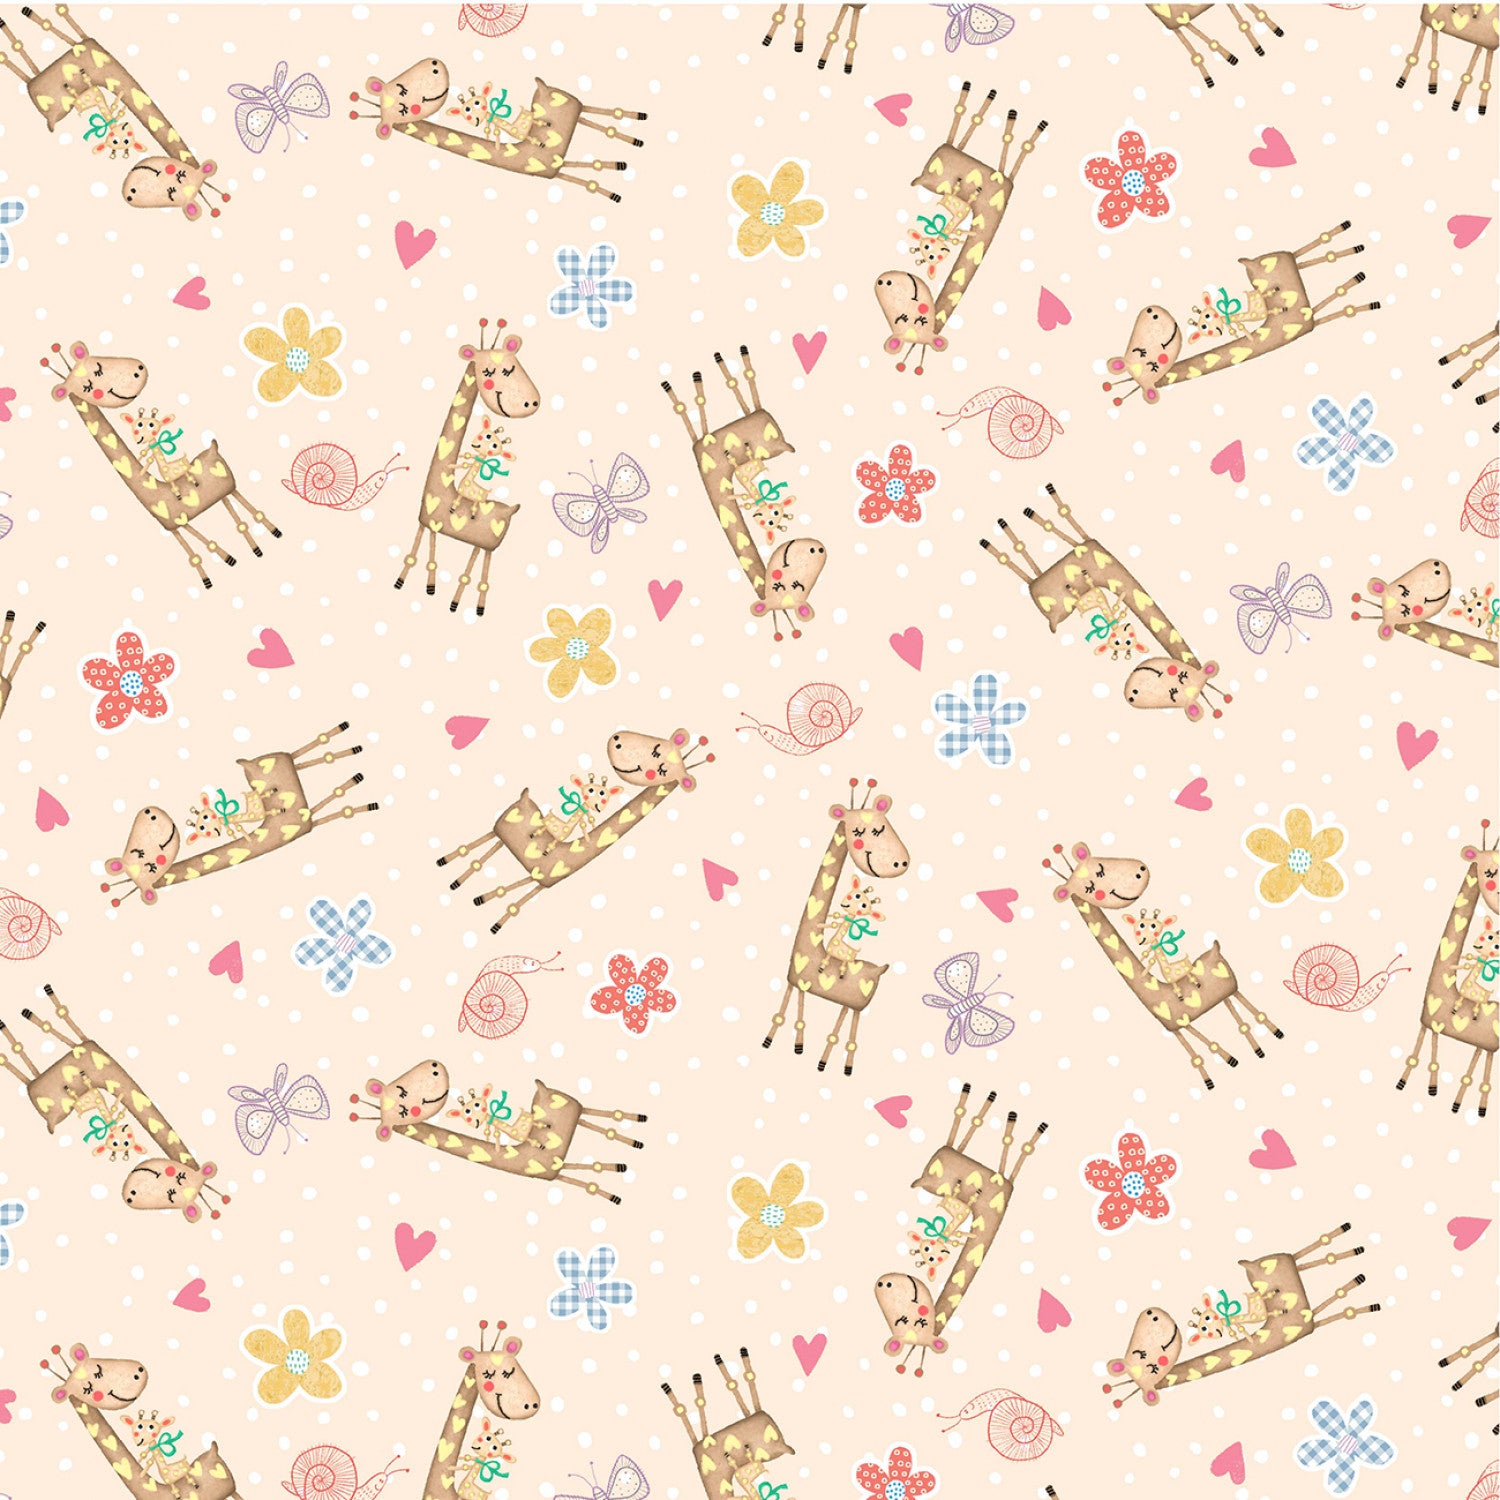 Baby Love - Beige Baby Giraffe by Tracy Cottingham for Michael Miller Fabrics